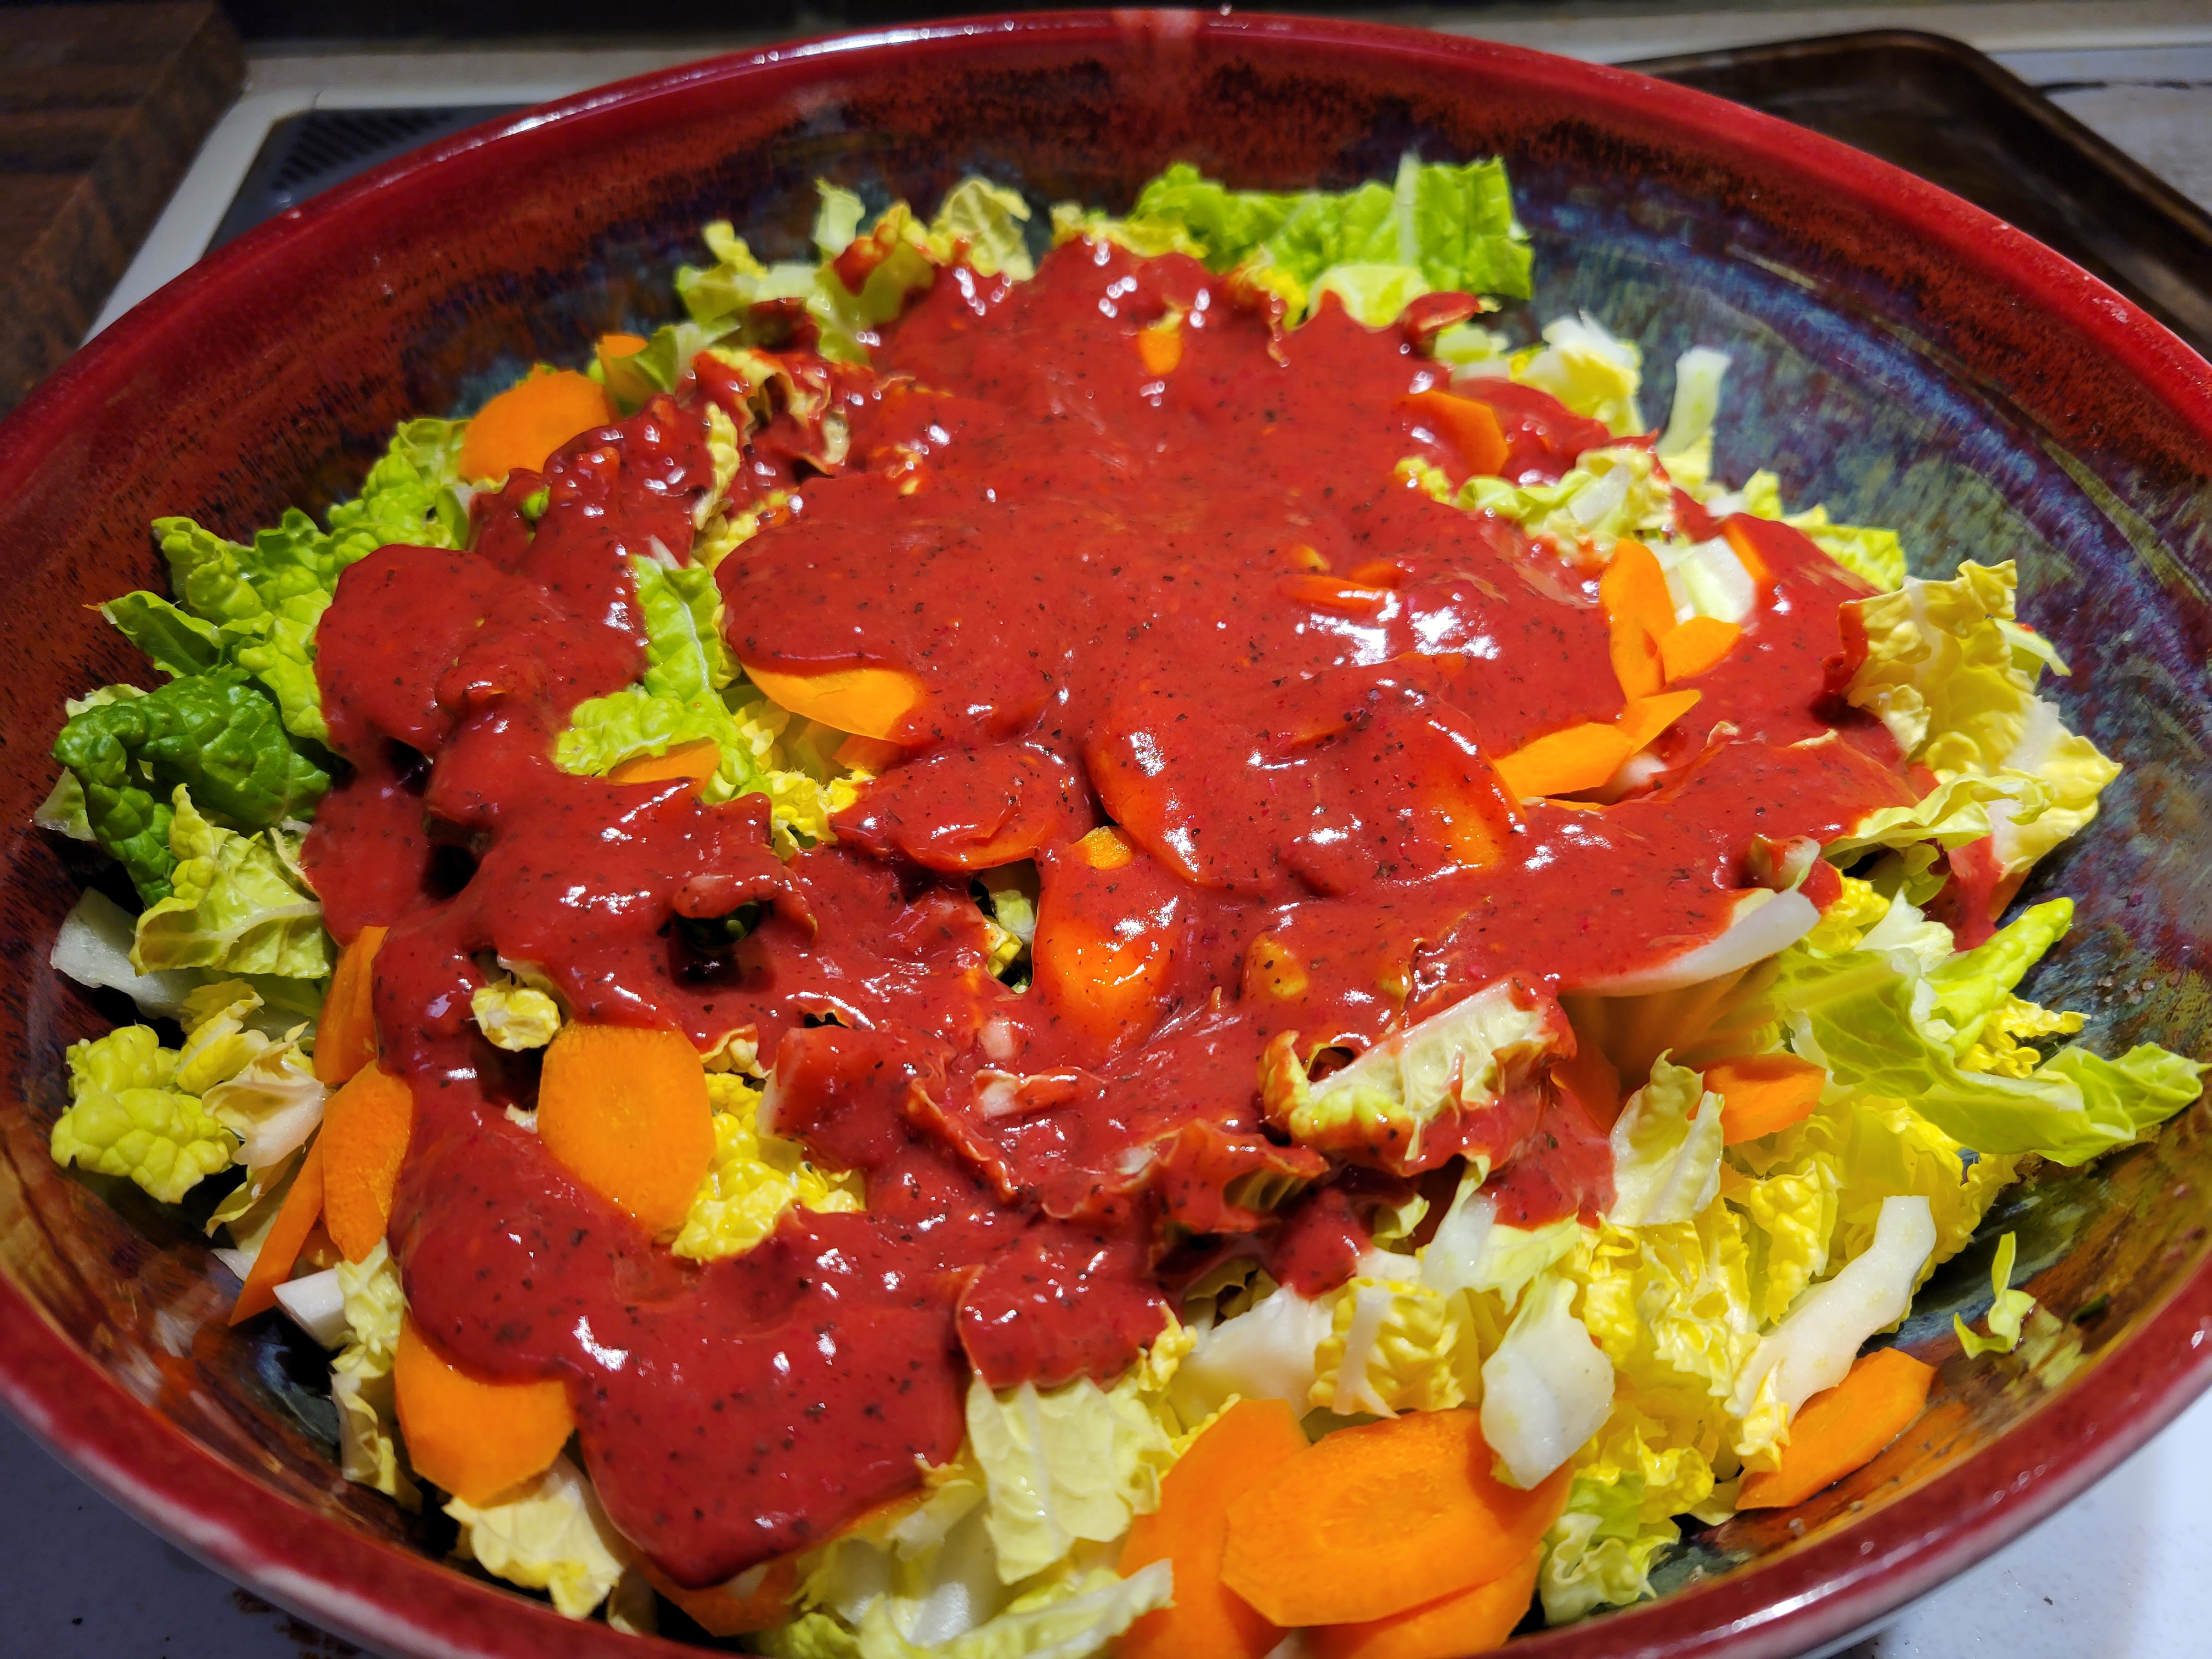 big bowl of cabbage salad with bright red raspberry dressing